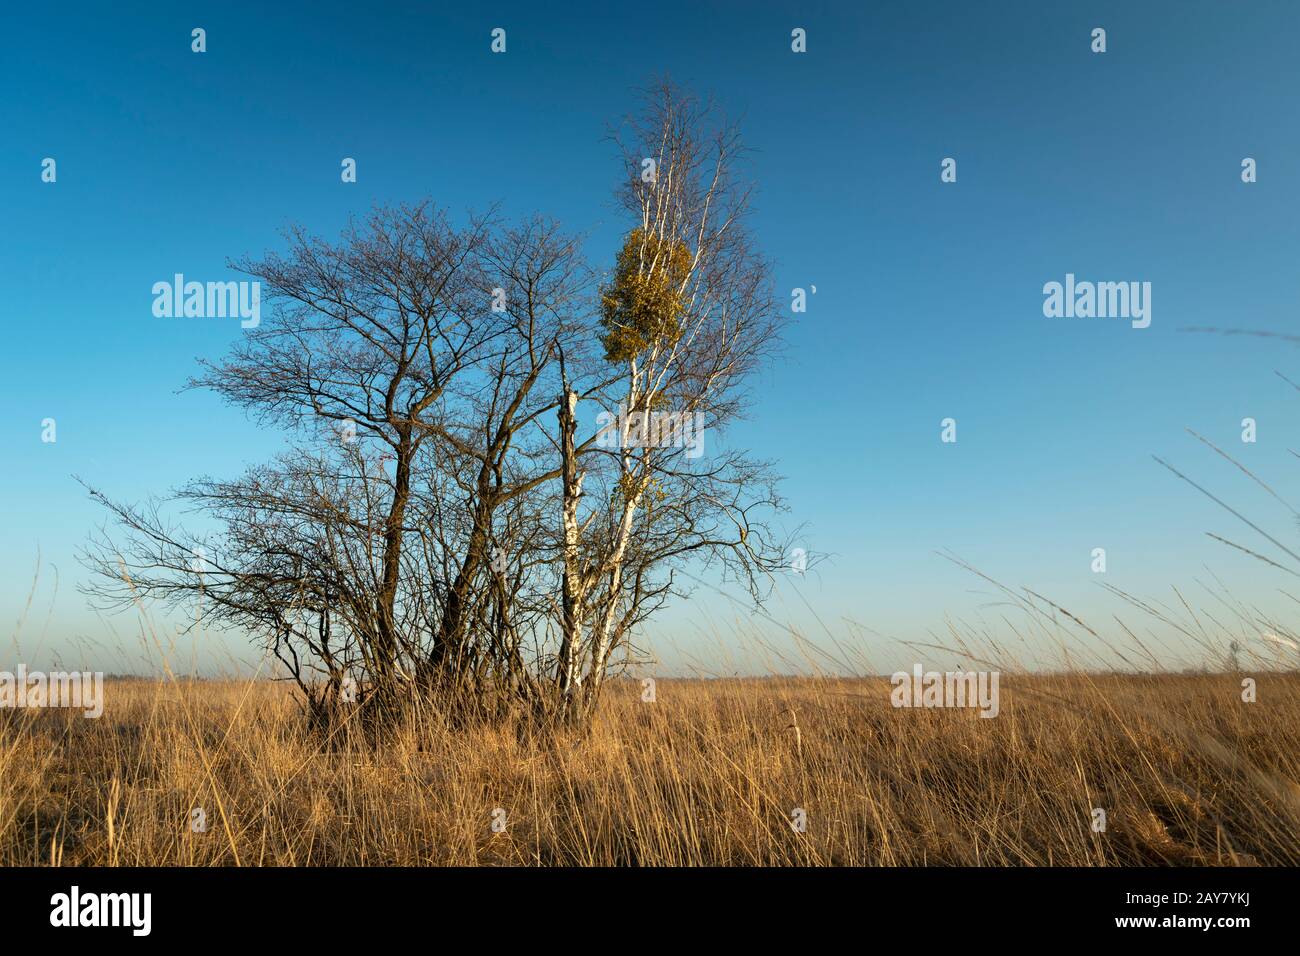 Group of trees on the meadow with tall grasses, horizon and blue sky Stock Photo